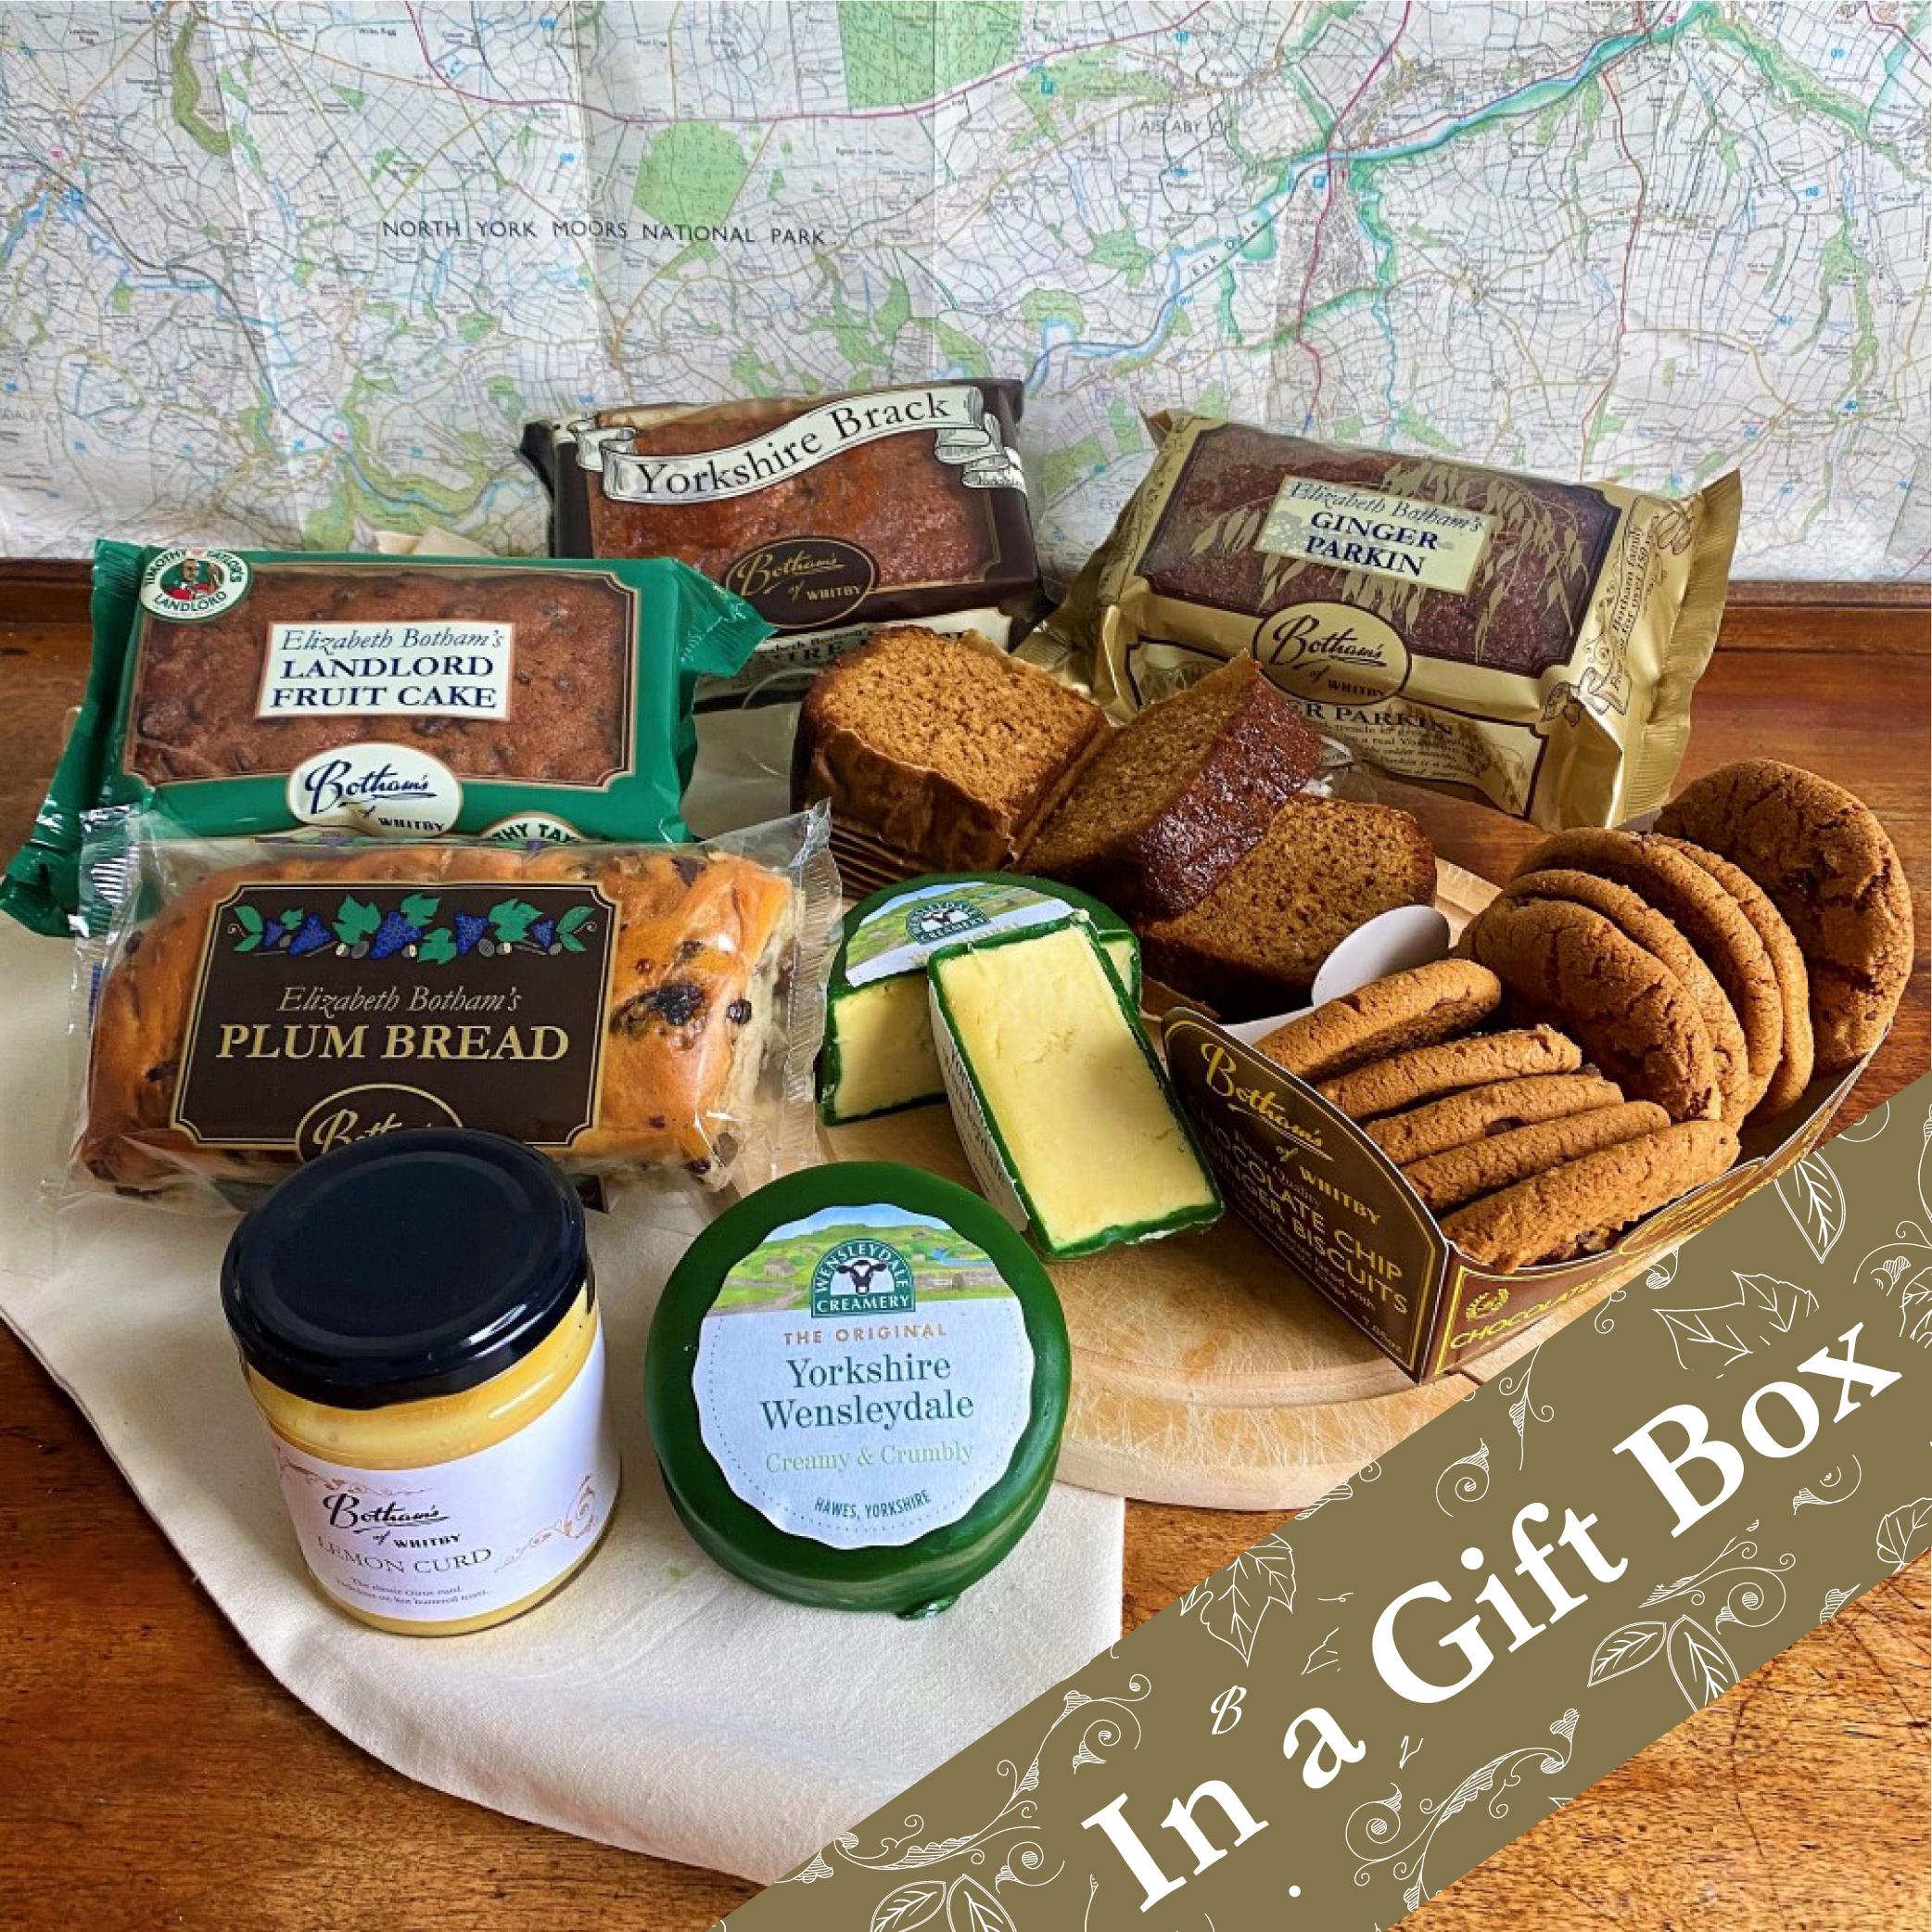 Image displays content of Dales Hamper, including: Yorkshire Brack Plum Bread Yorkshire Ginger Parkin Landlord Fruit Cake Chocolate Chip & Ginger Biscuits Yorkshire Wensleydale Cheese Lemon Curd Botham's of Whitby Cotton Bag. Map of the Yorkshire Dales is displayed in the background.